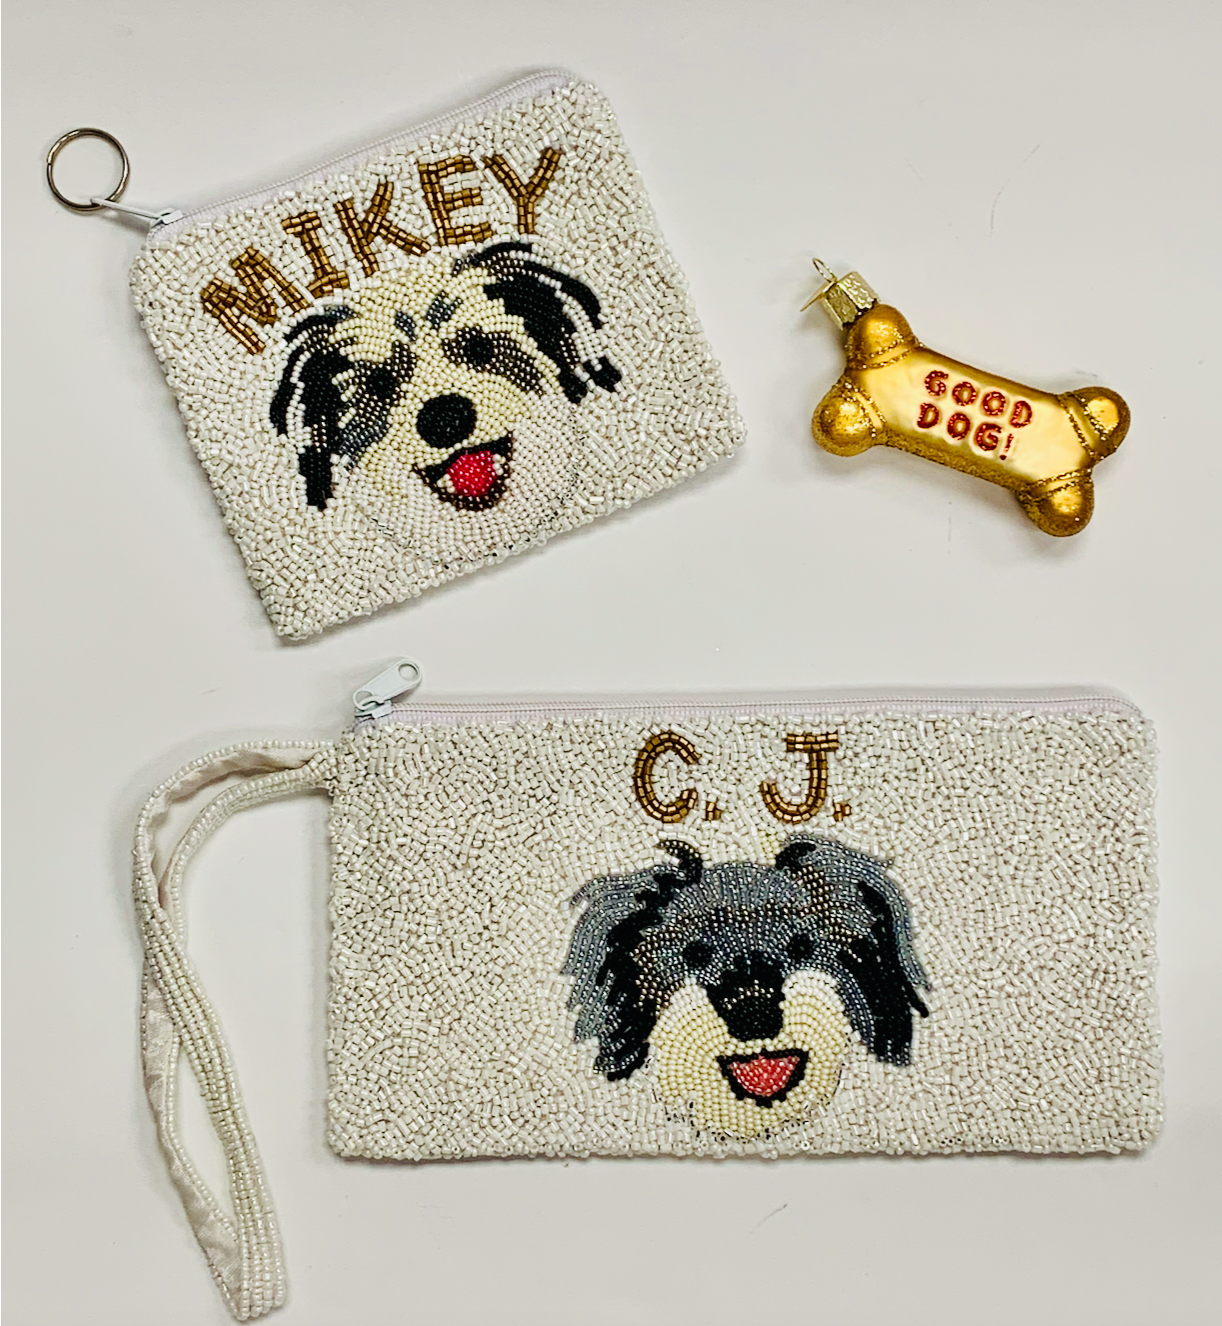 Clasp Coin Purse with a Dog Designed Fabric.